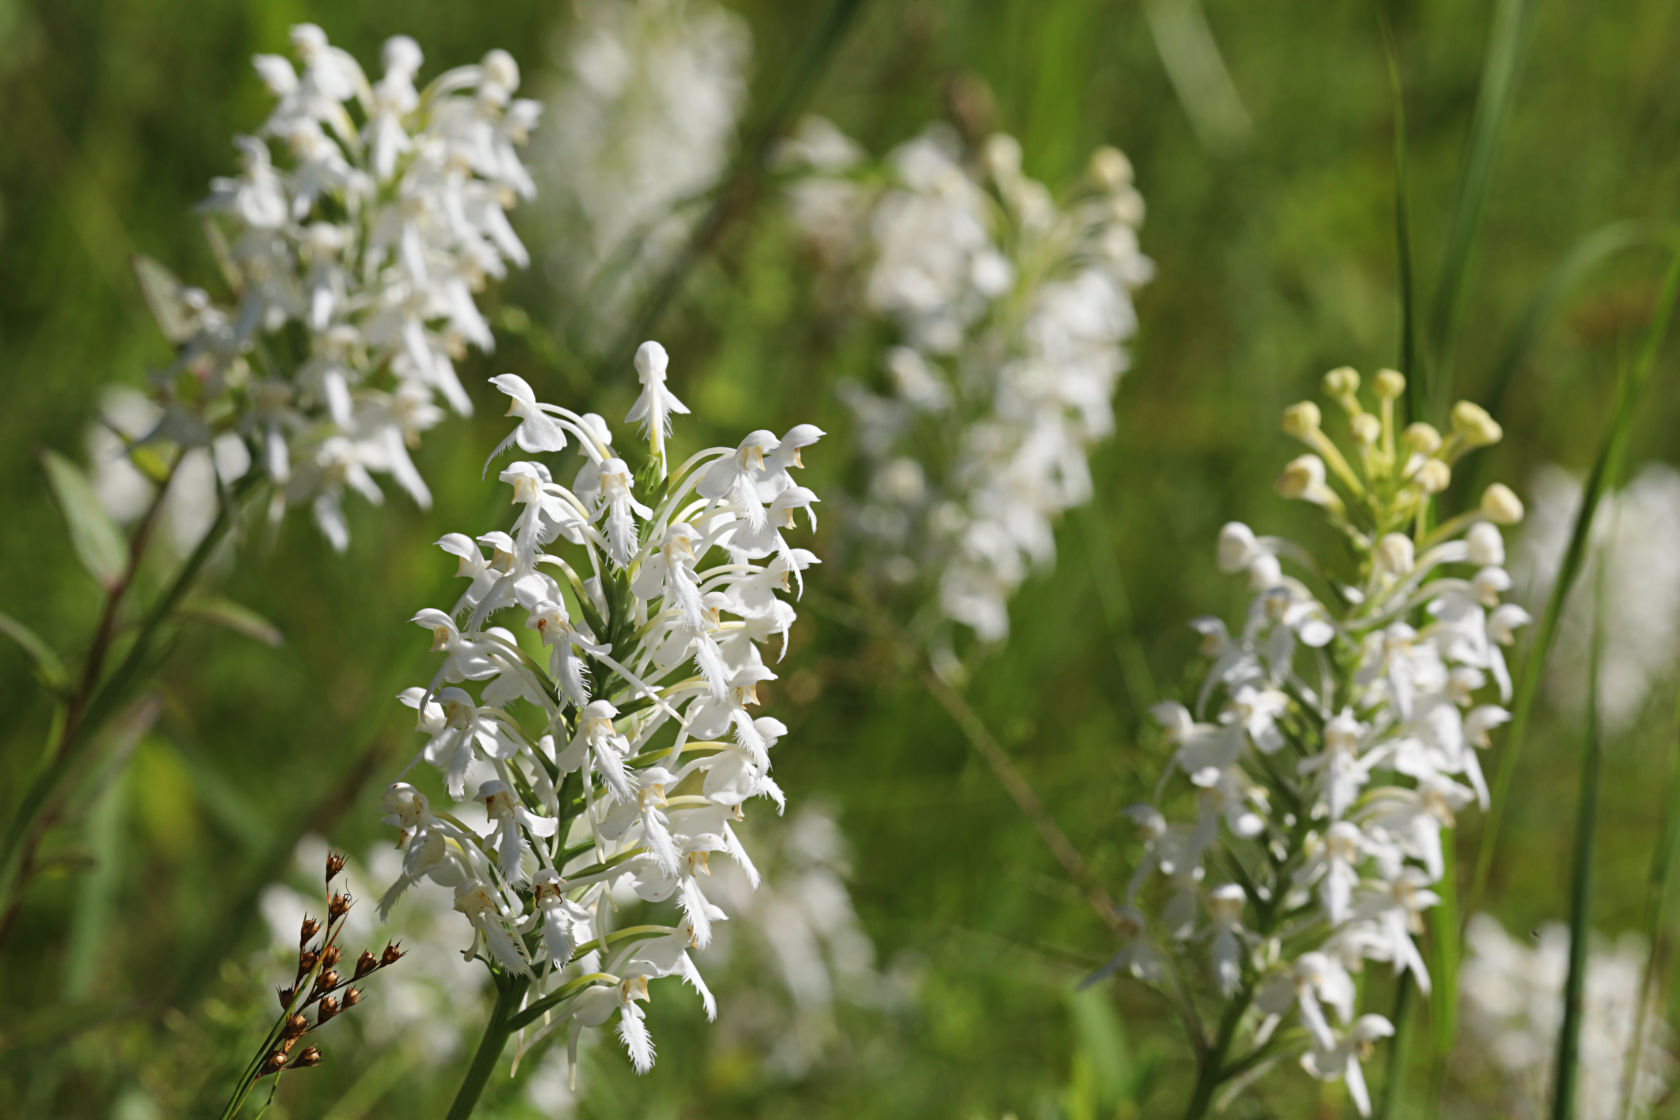 Northern White Fringed Orchid